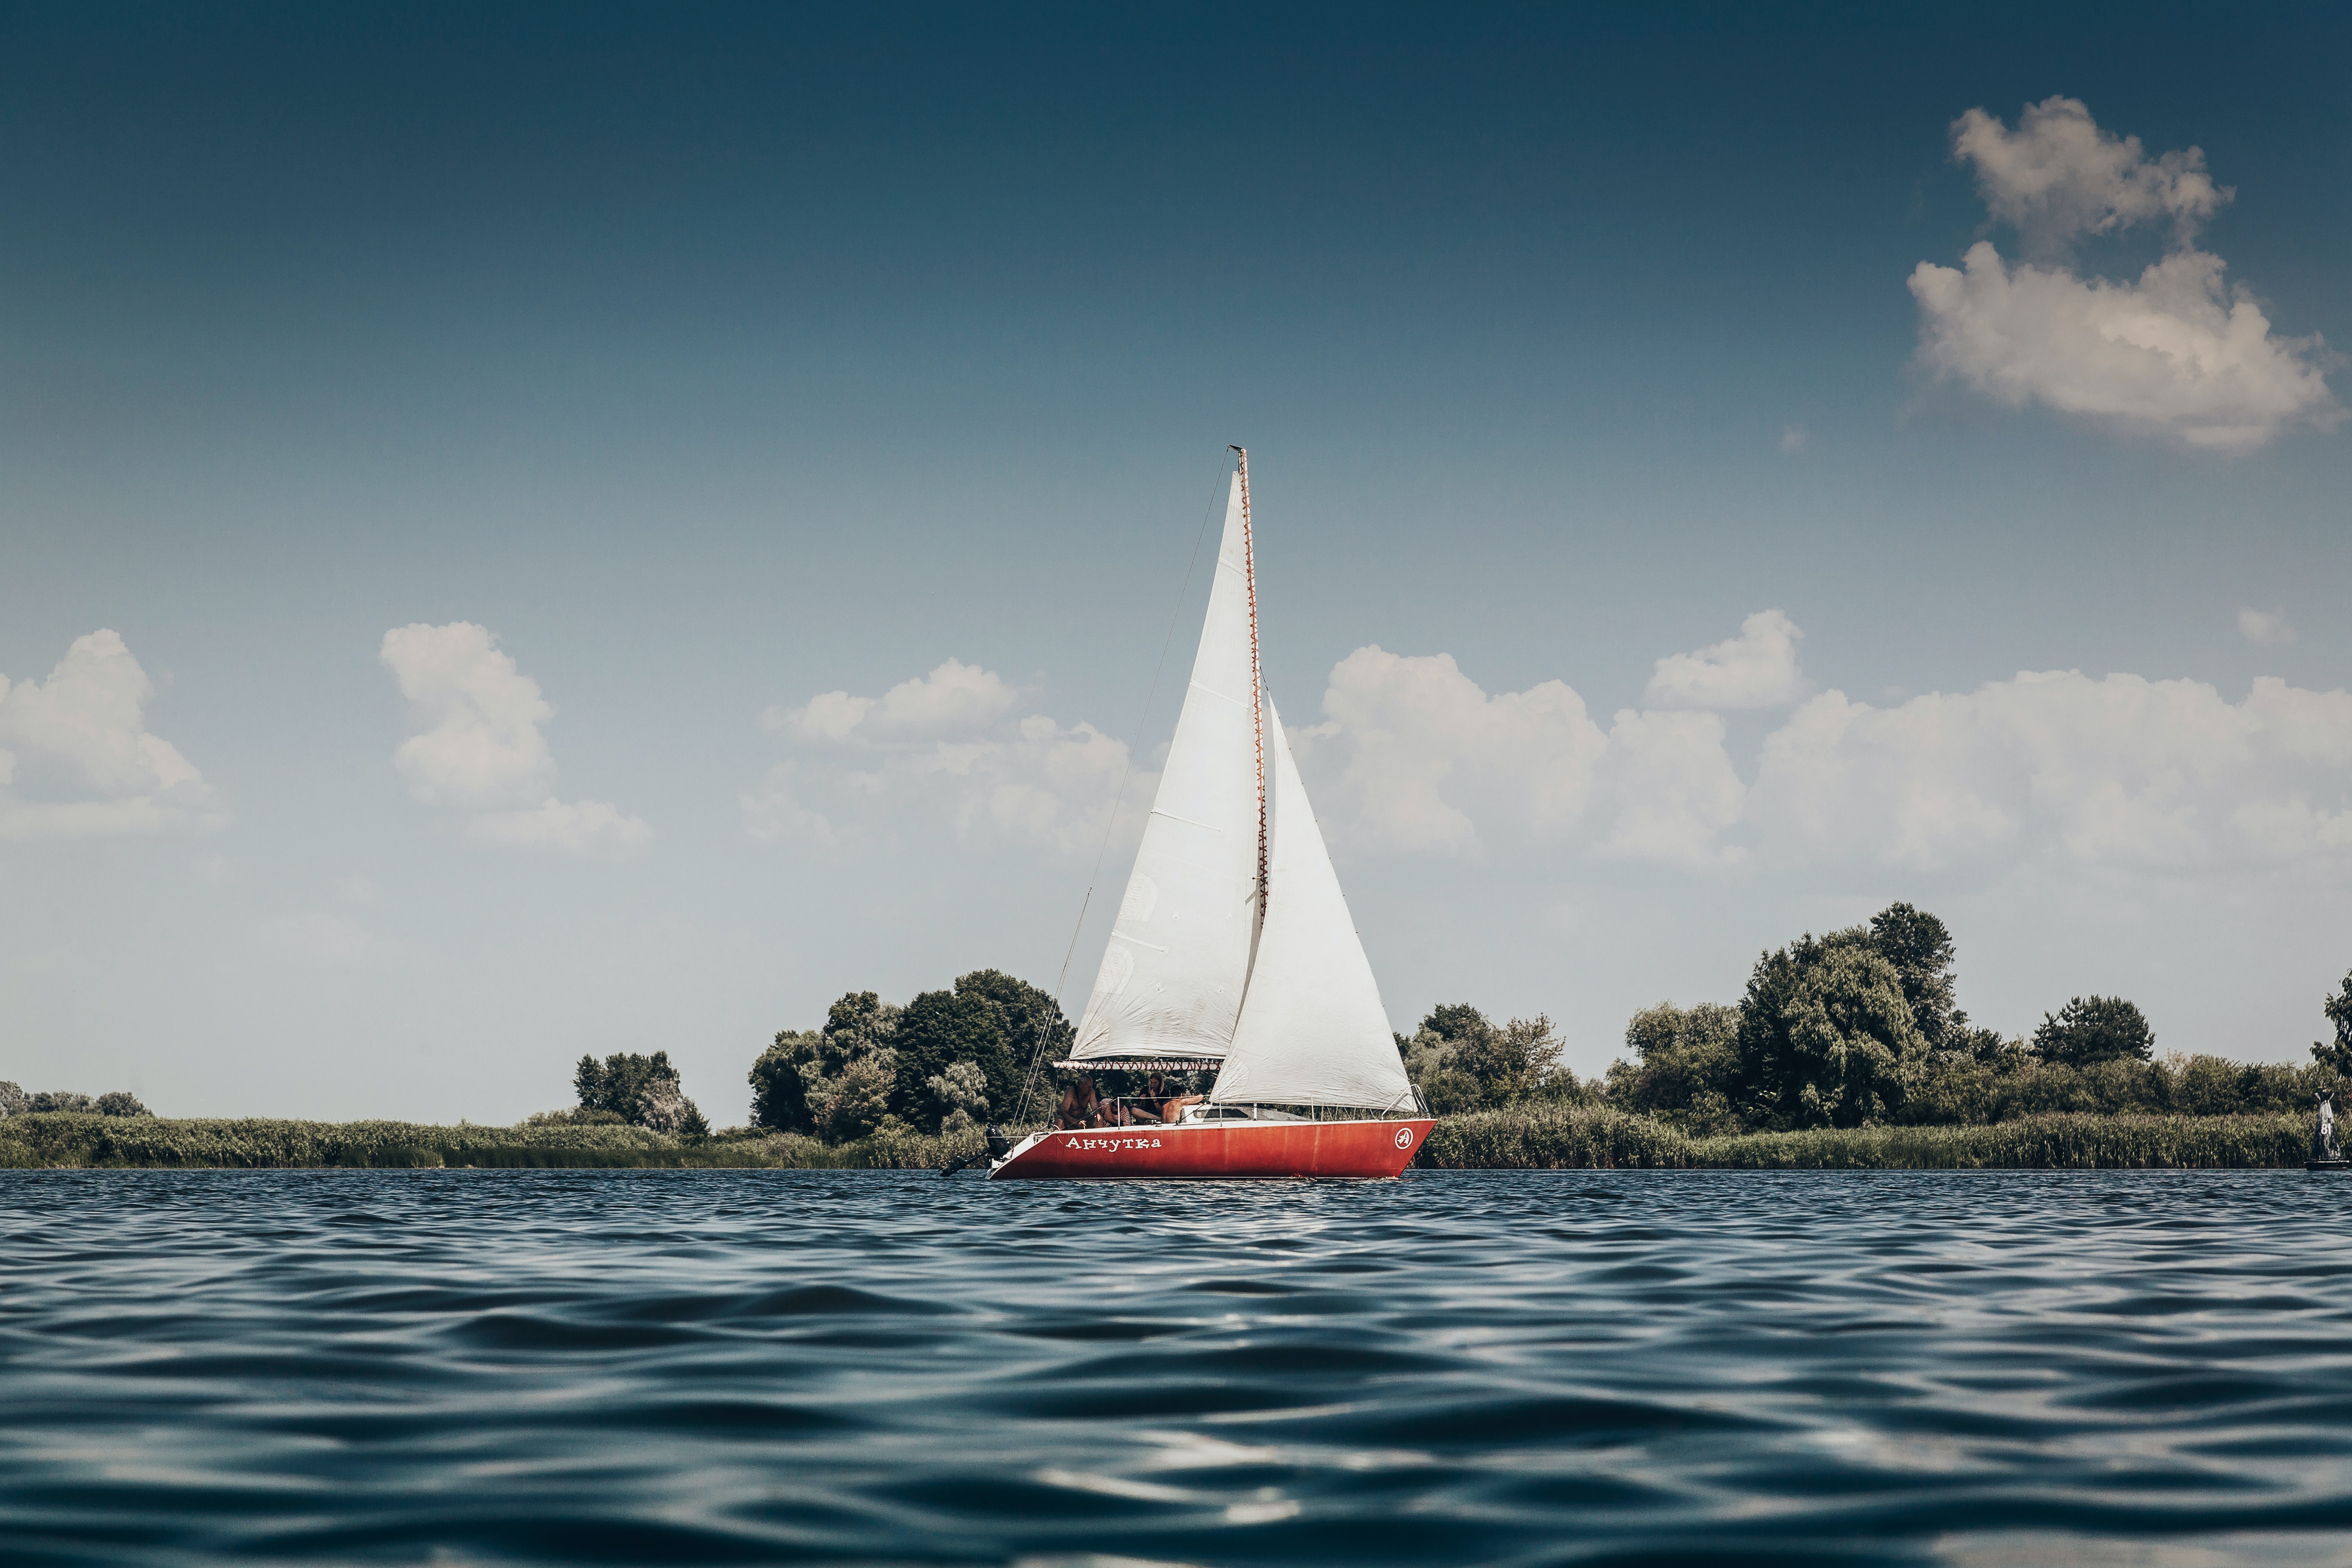 Sail boat on the water